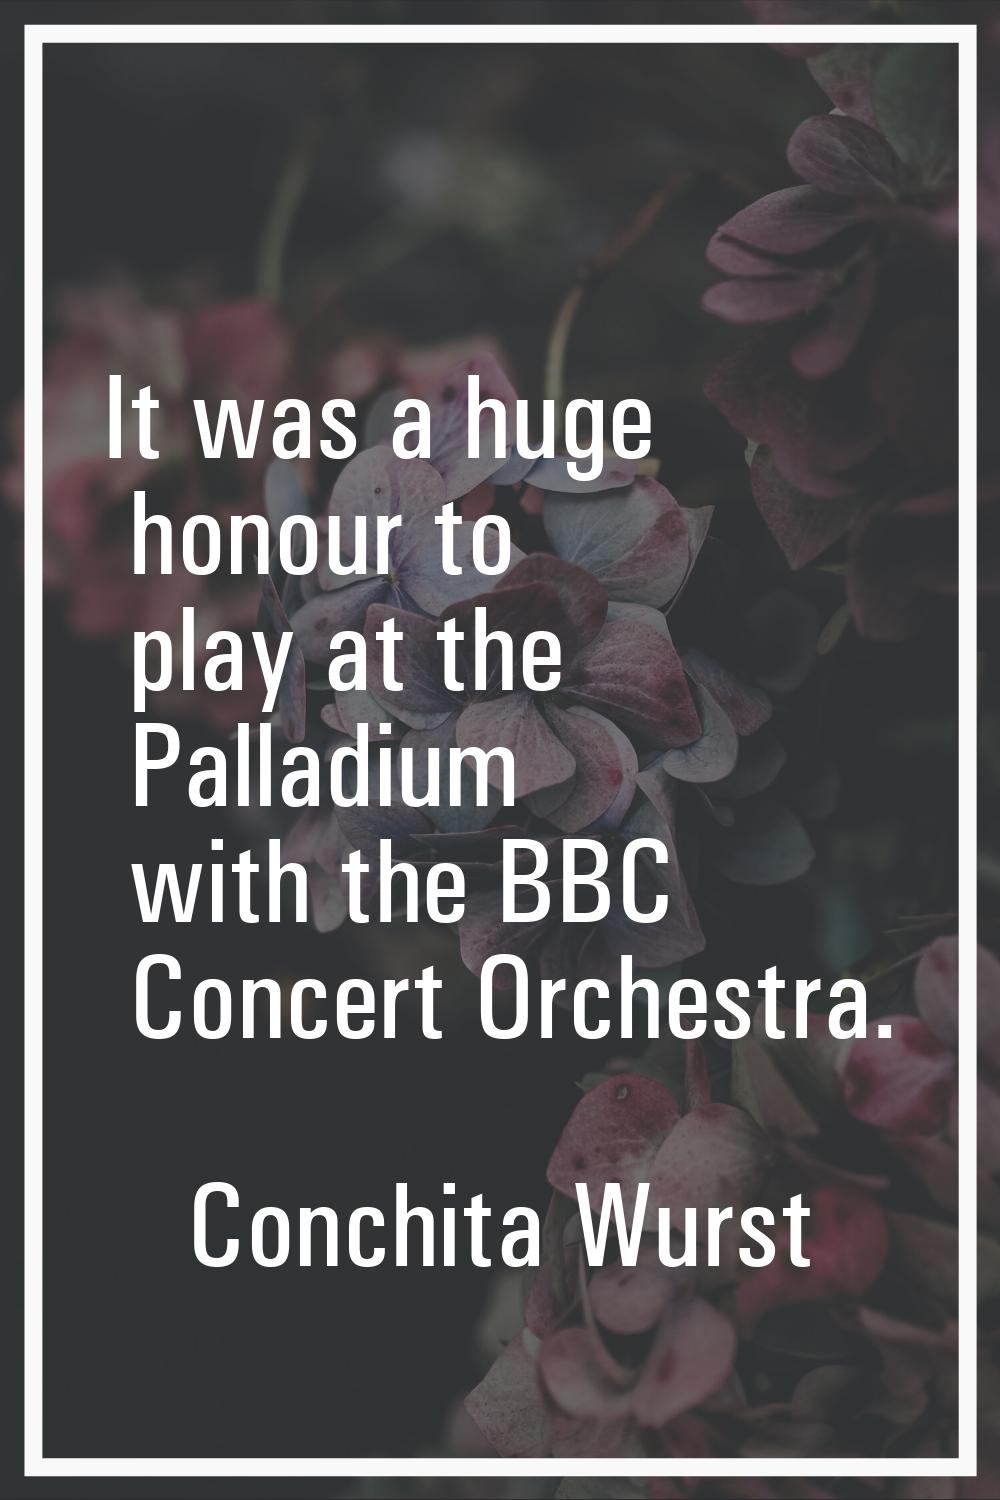 It was a huge honour to play at the Palladium with the BBC Concert Orchestra.